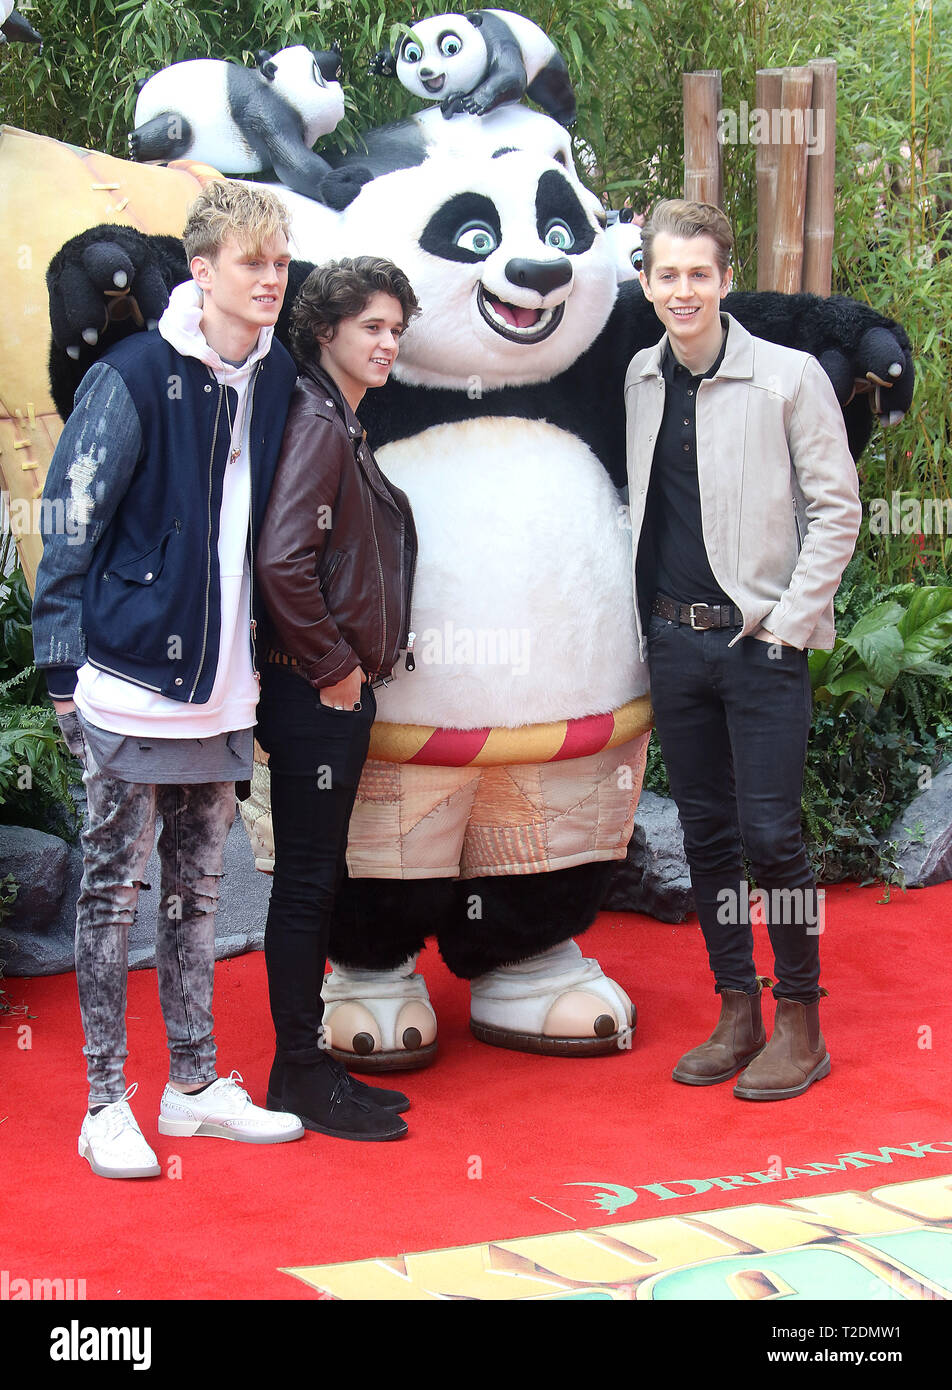 Mar 06, 2016 - London, England, UK - The European Premiere Of 'Kung Fu Panda 3', Odeon Leicester Square - Red Carpet Arrivals Photo Shows: (L-R) Trist Stock Photo